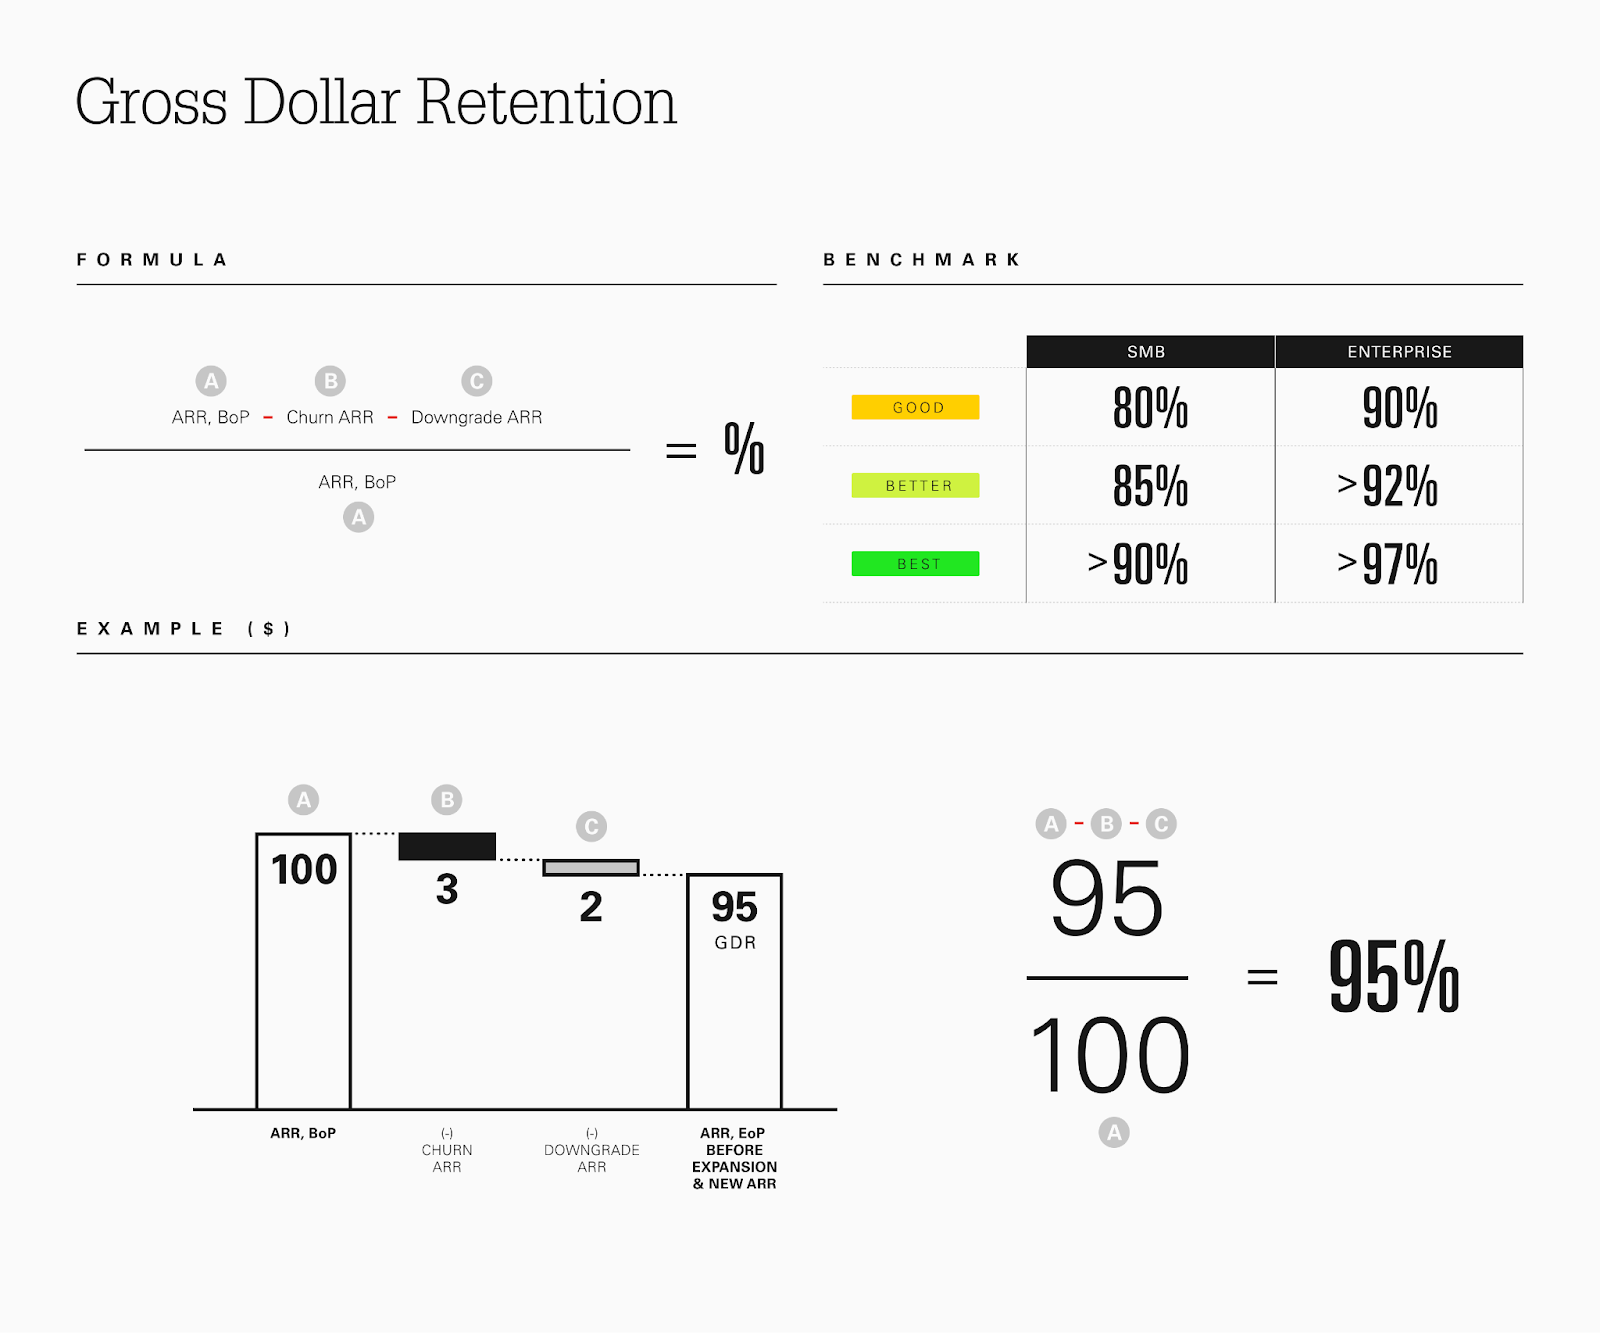 Gross Dollar Retention formula and benchmarks